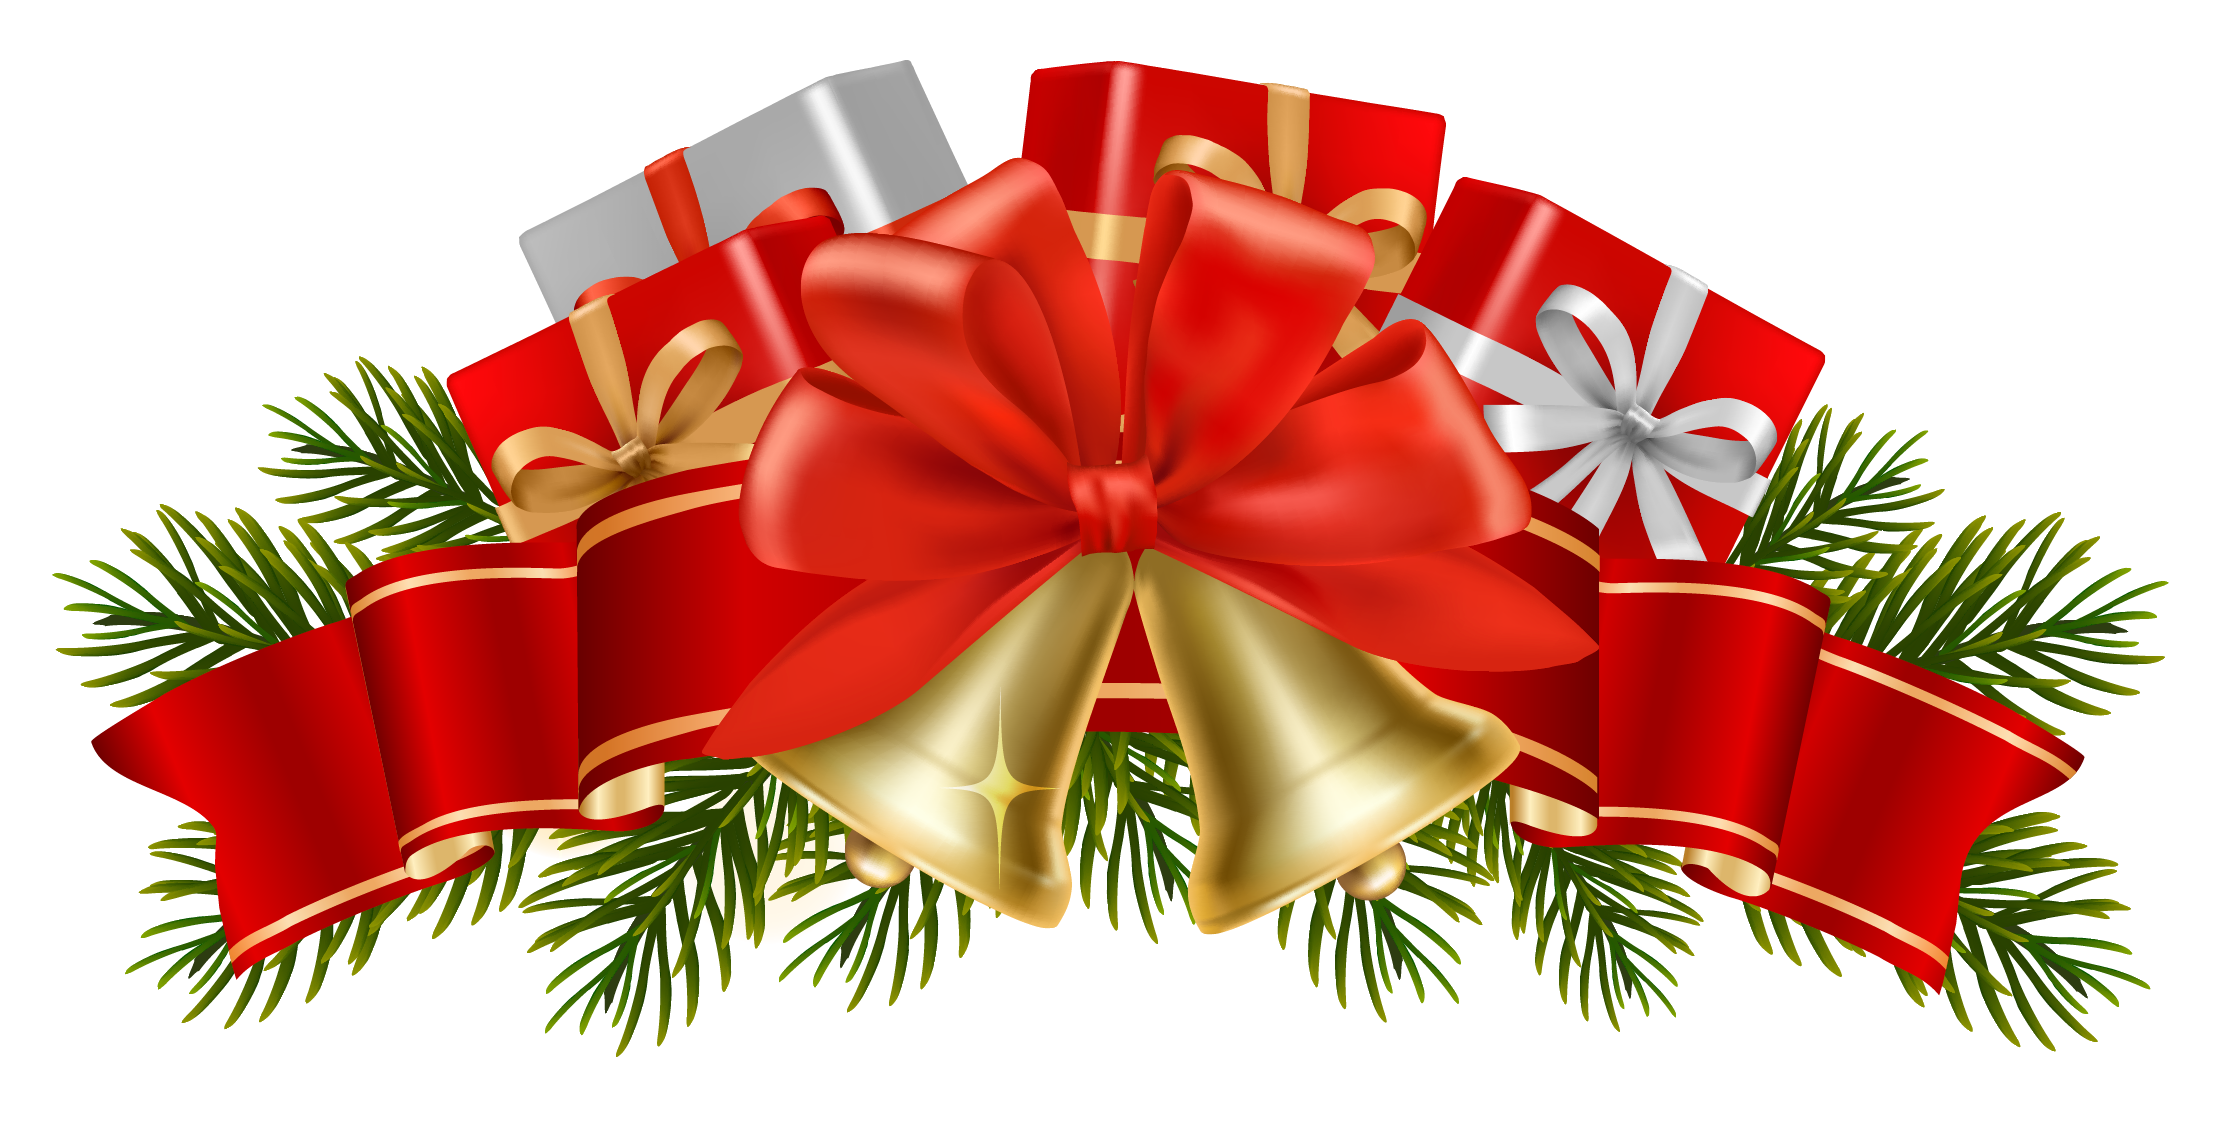 Download PNG image - Aesthetic Christmas PNG Image 